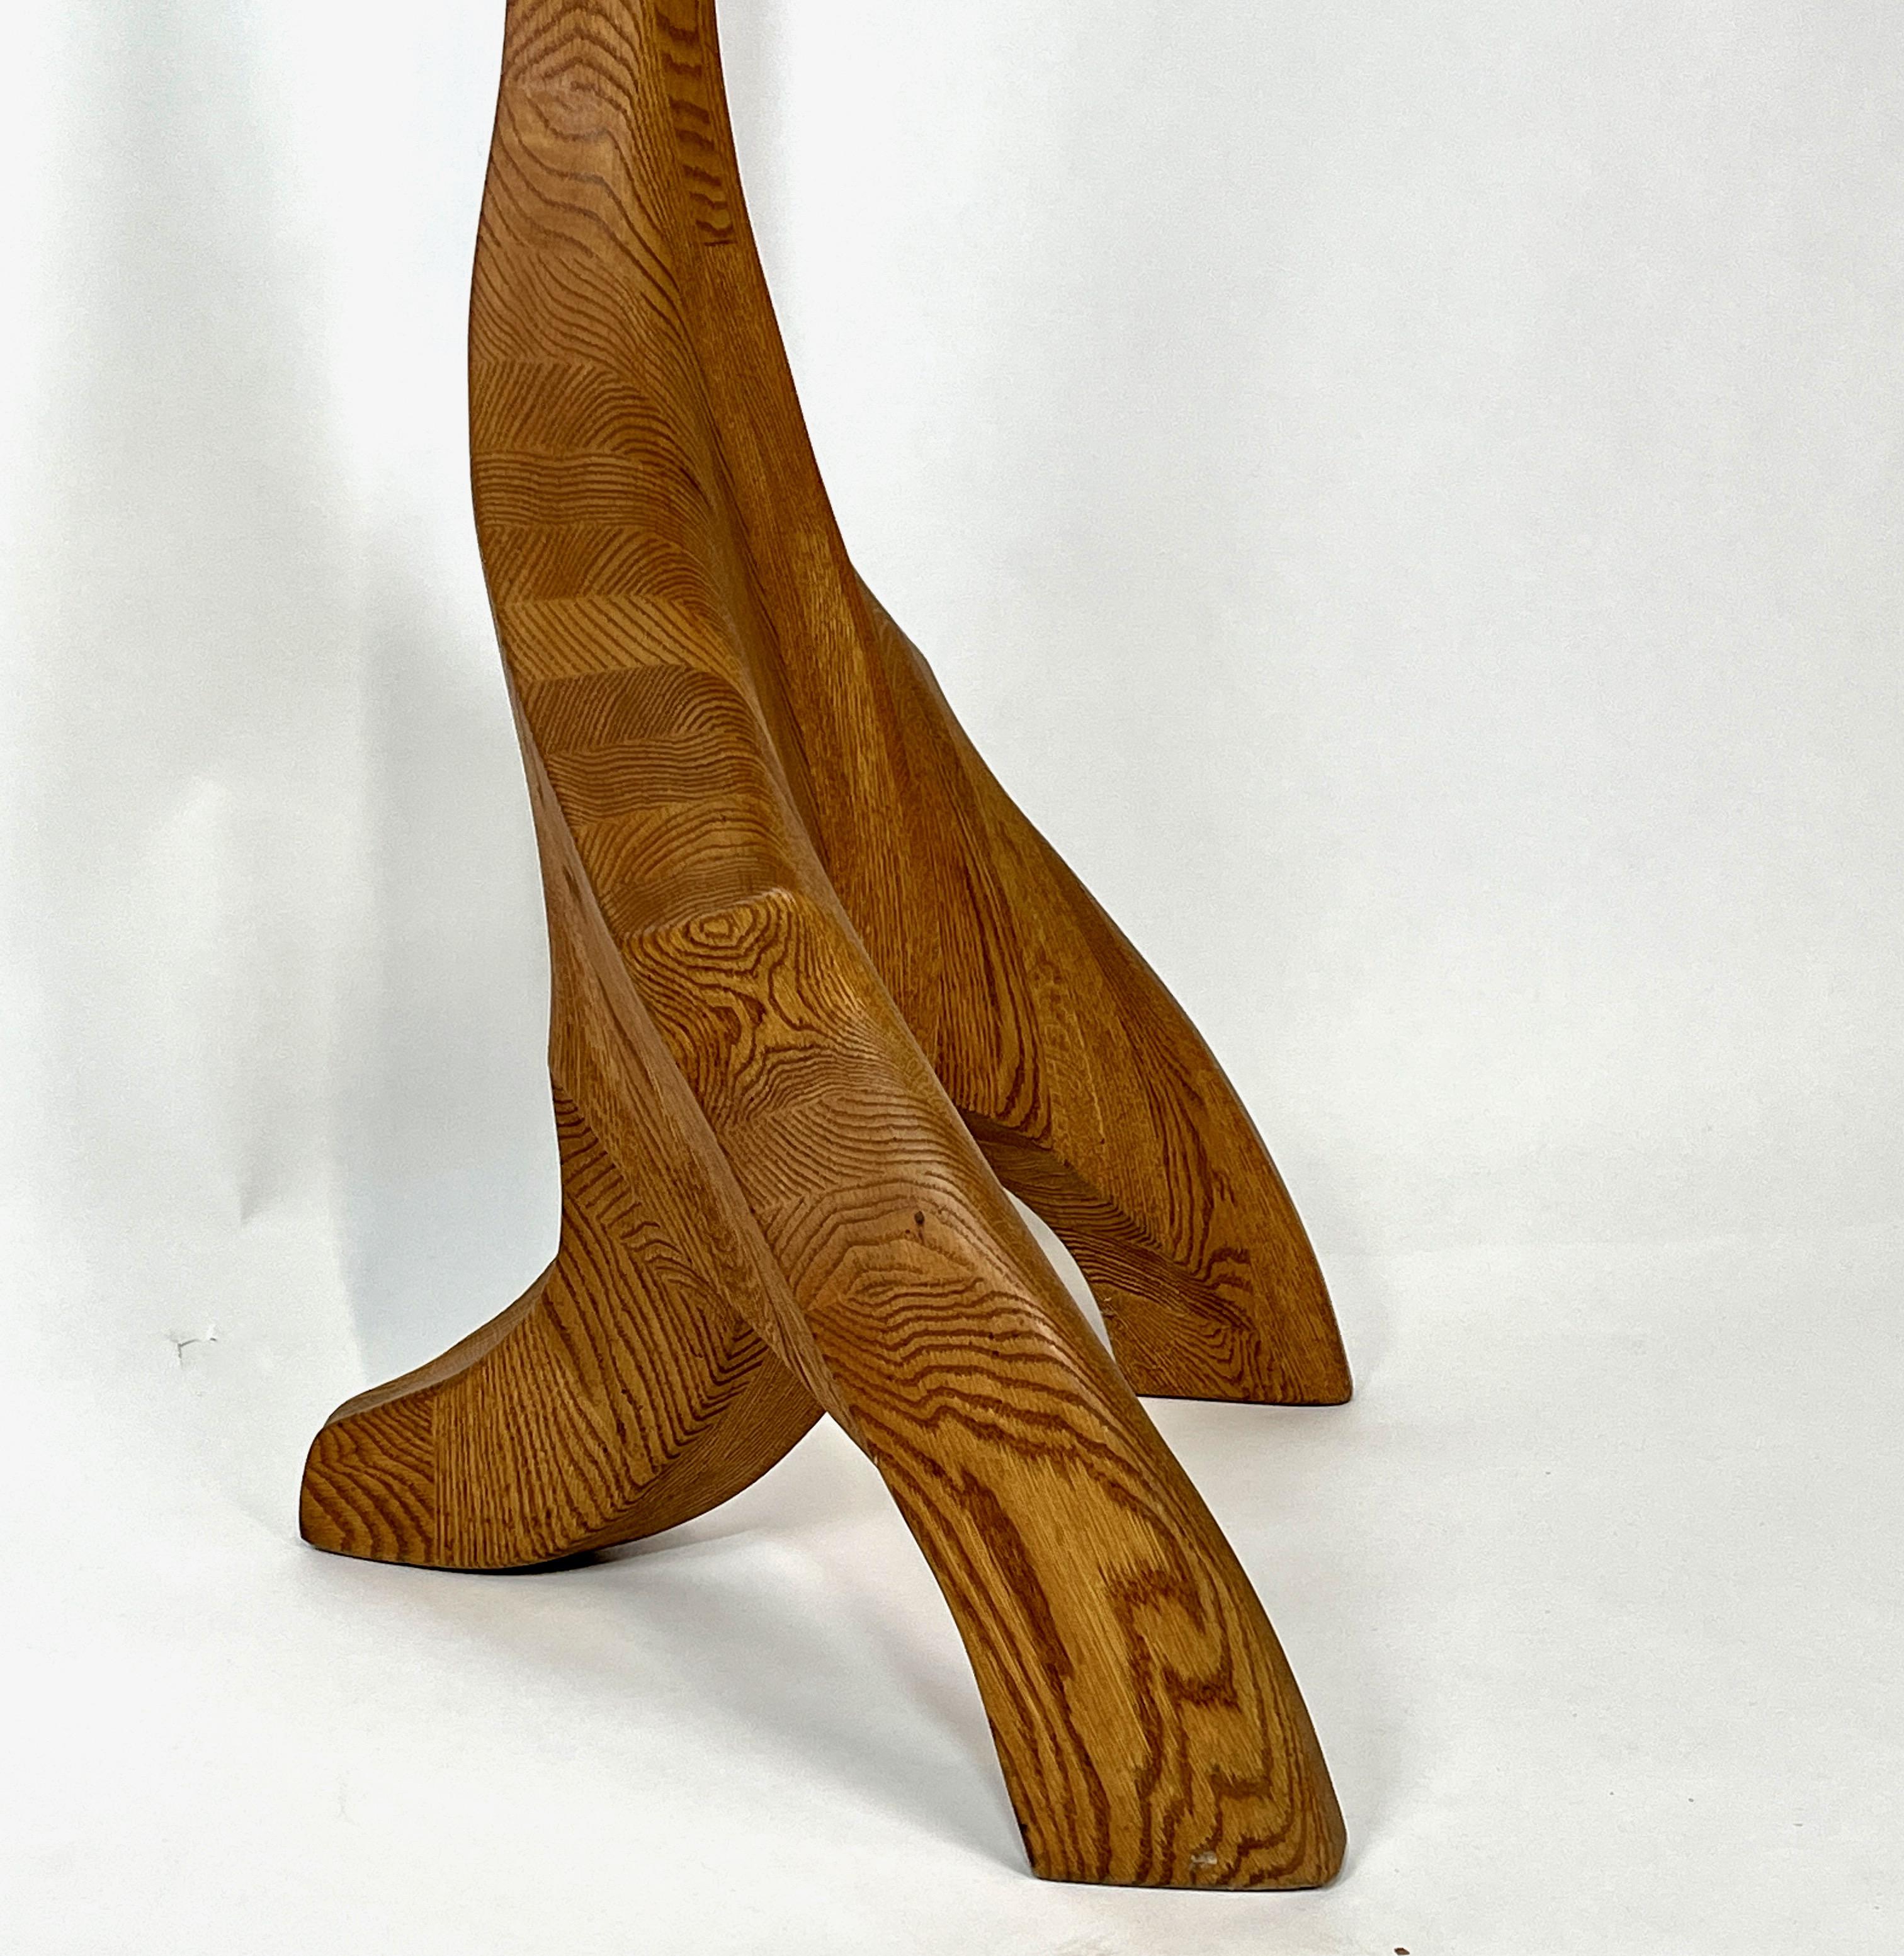 American Tall & Heavy Sculptural Handcrafted Coat Rack in the style of Wendell Castle